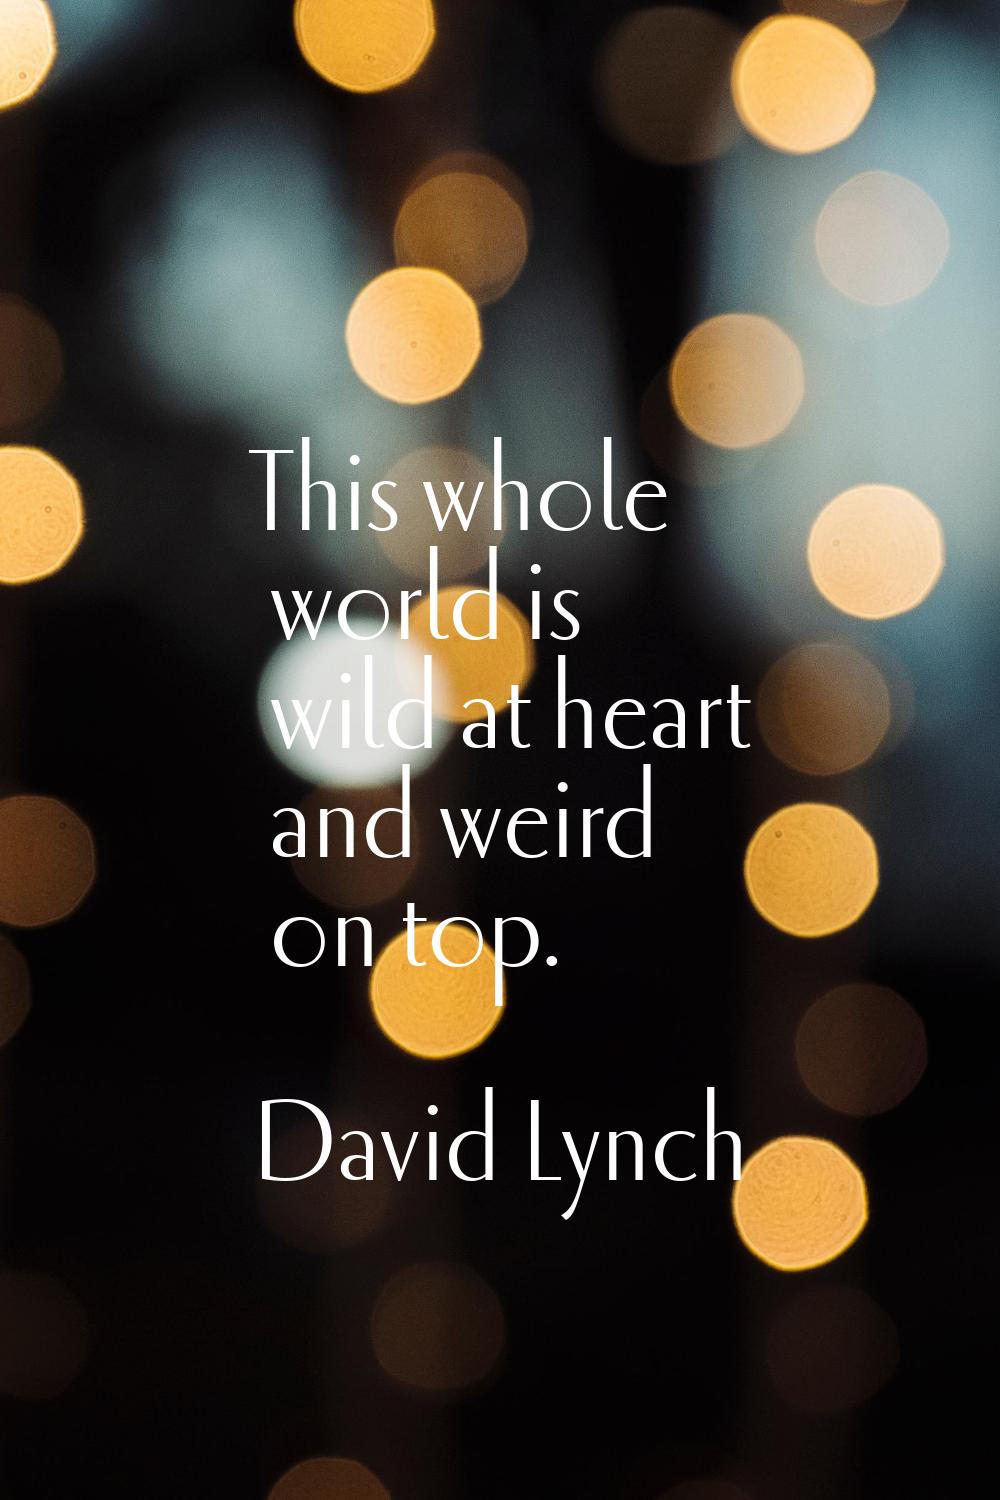 This whole world is wild at heart and weird on top.